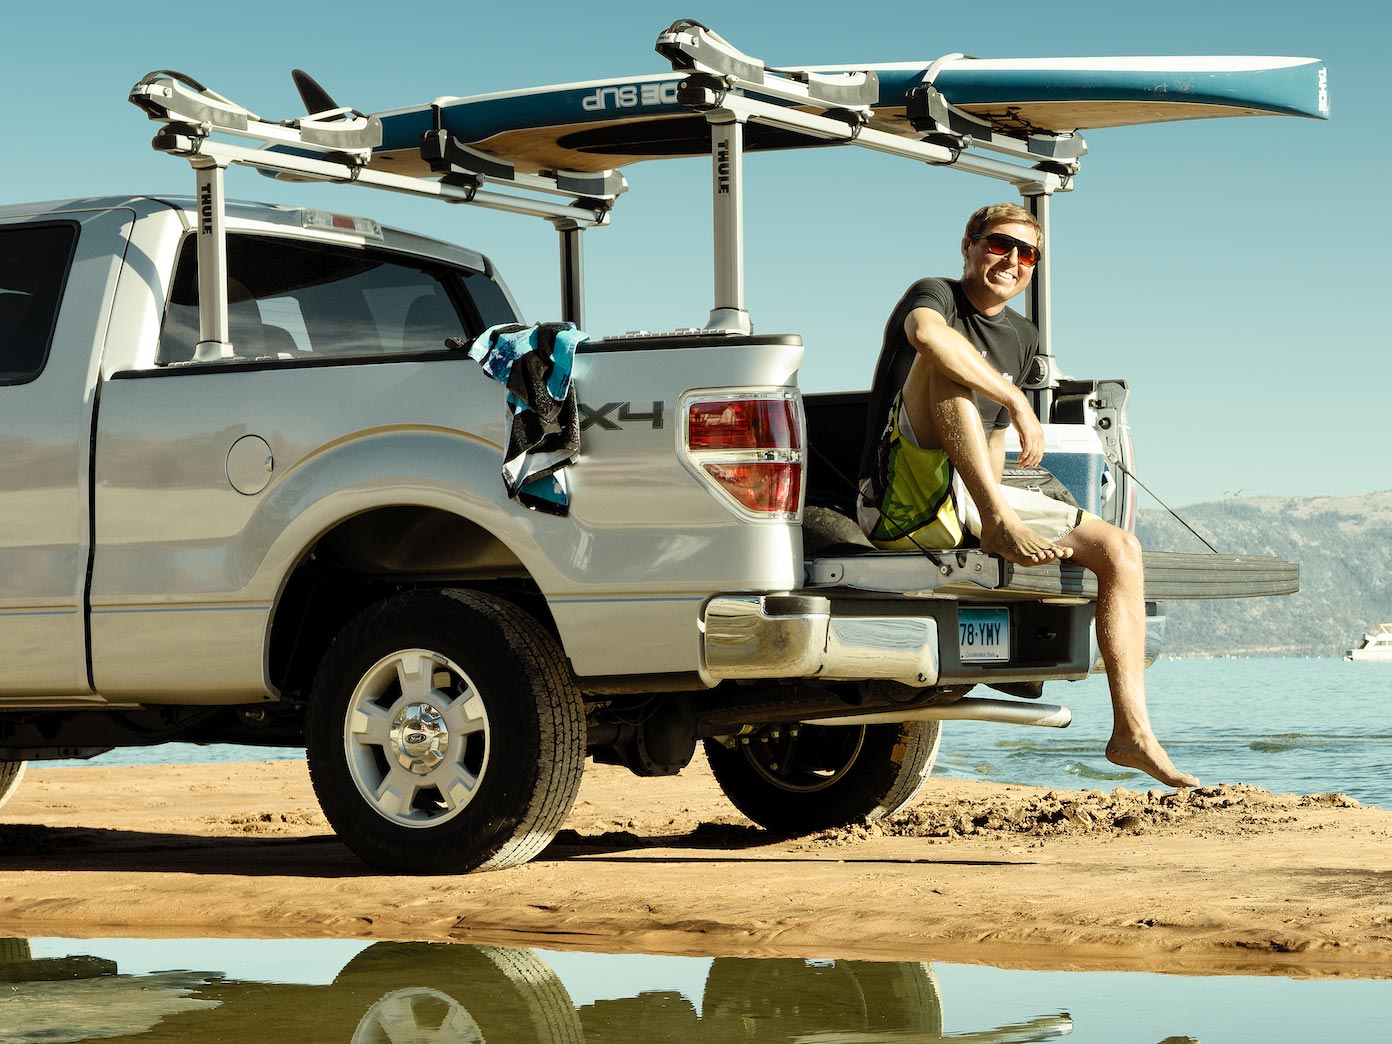 Guy sitting on the back of a pick-up truck with surfboard on rack.